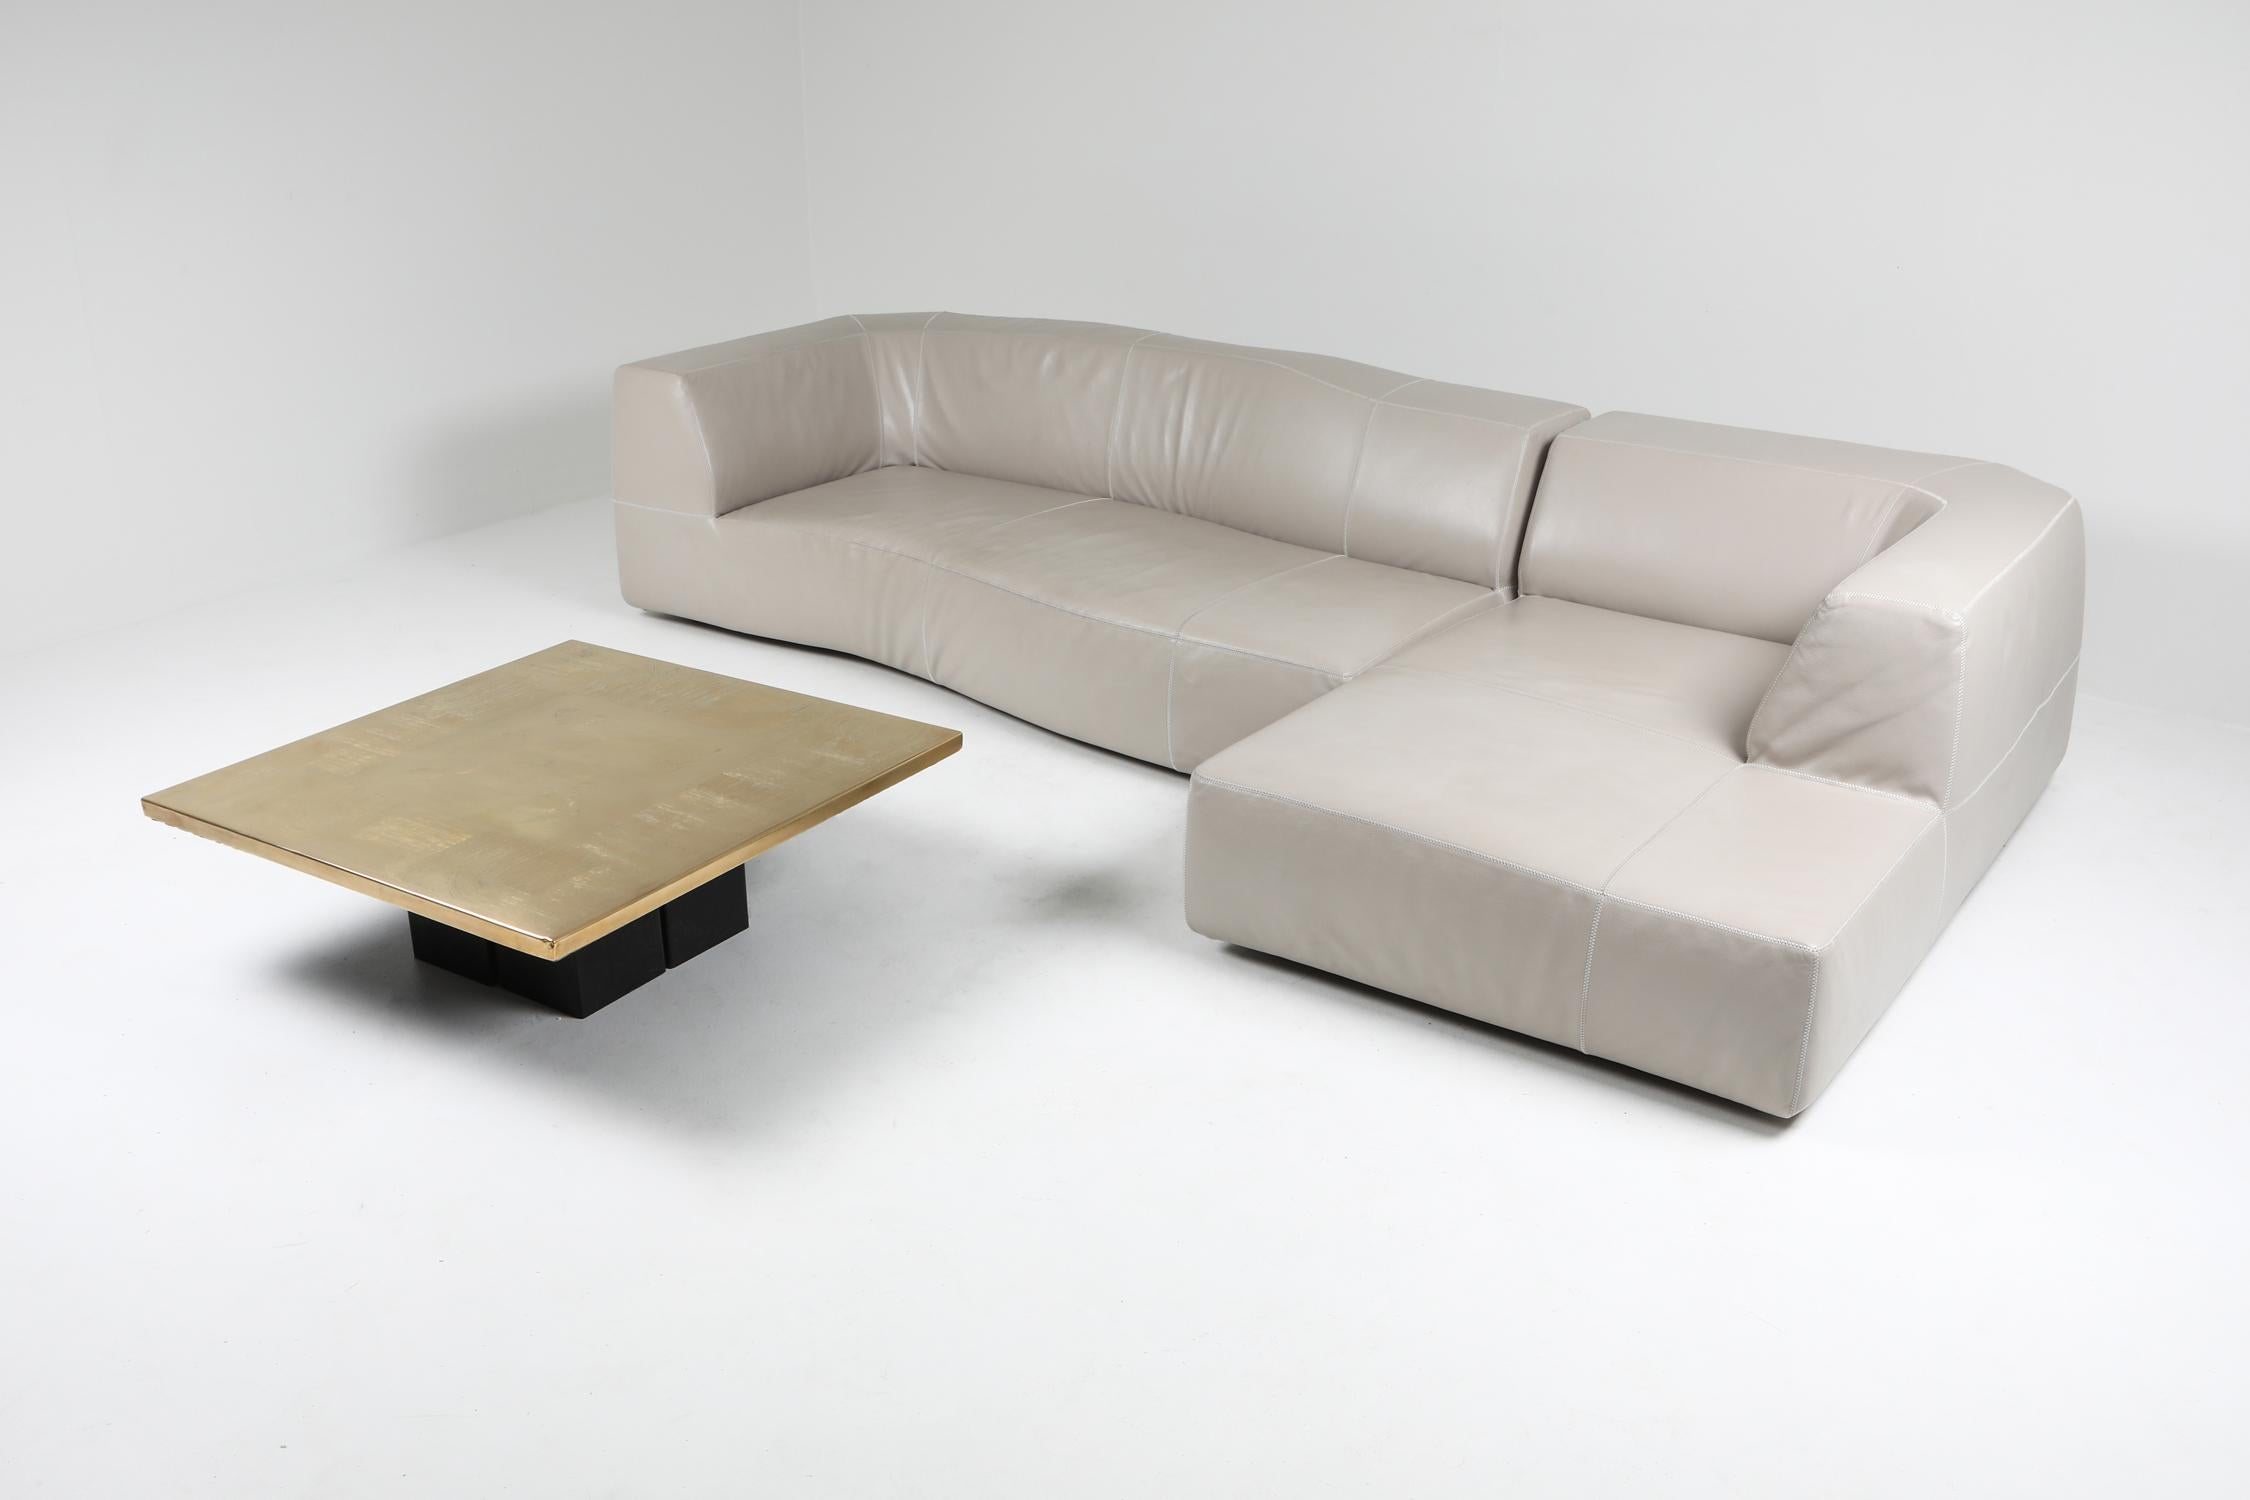 Contemporary B&B Italia sectional couch 'Bend' by Patricia Urquiola